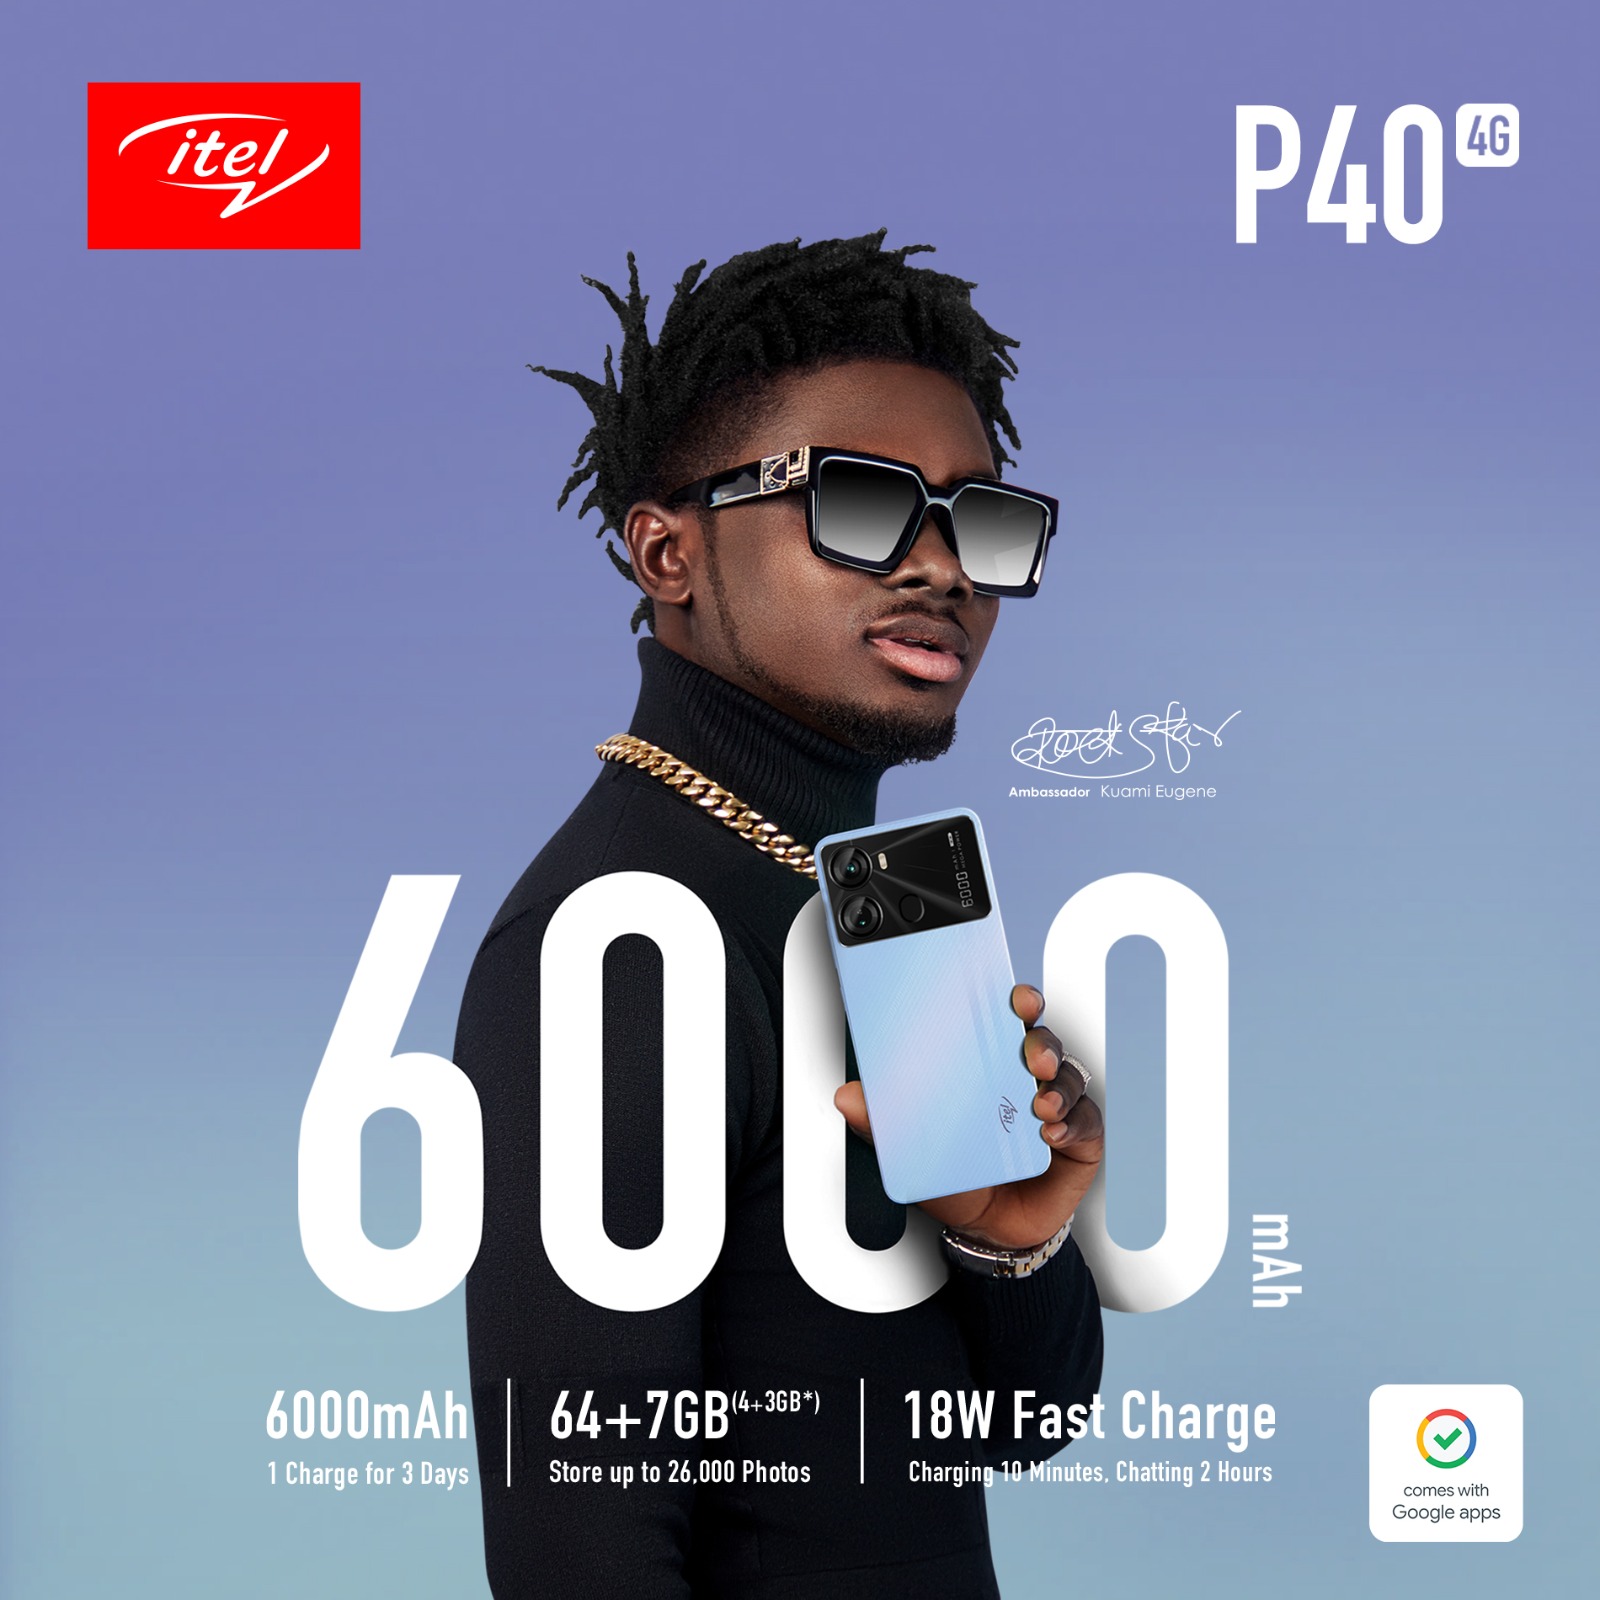 Here are ten reasons why you should consider buying the itel P40